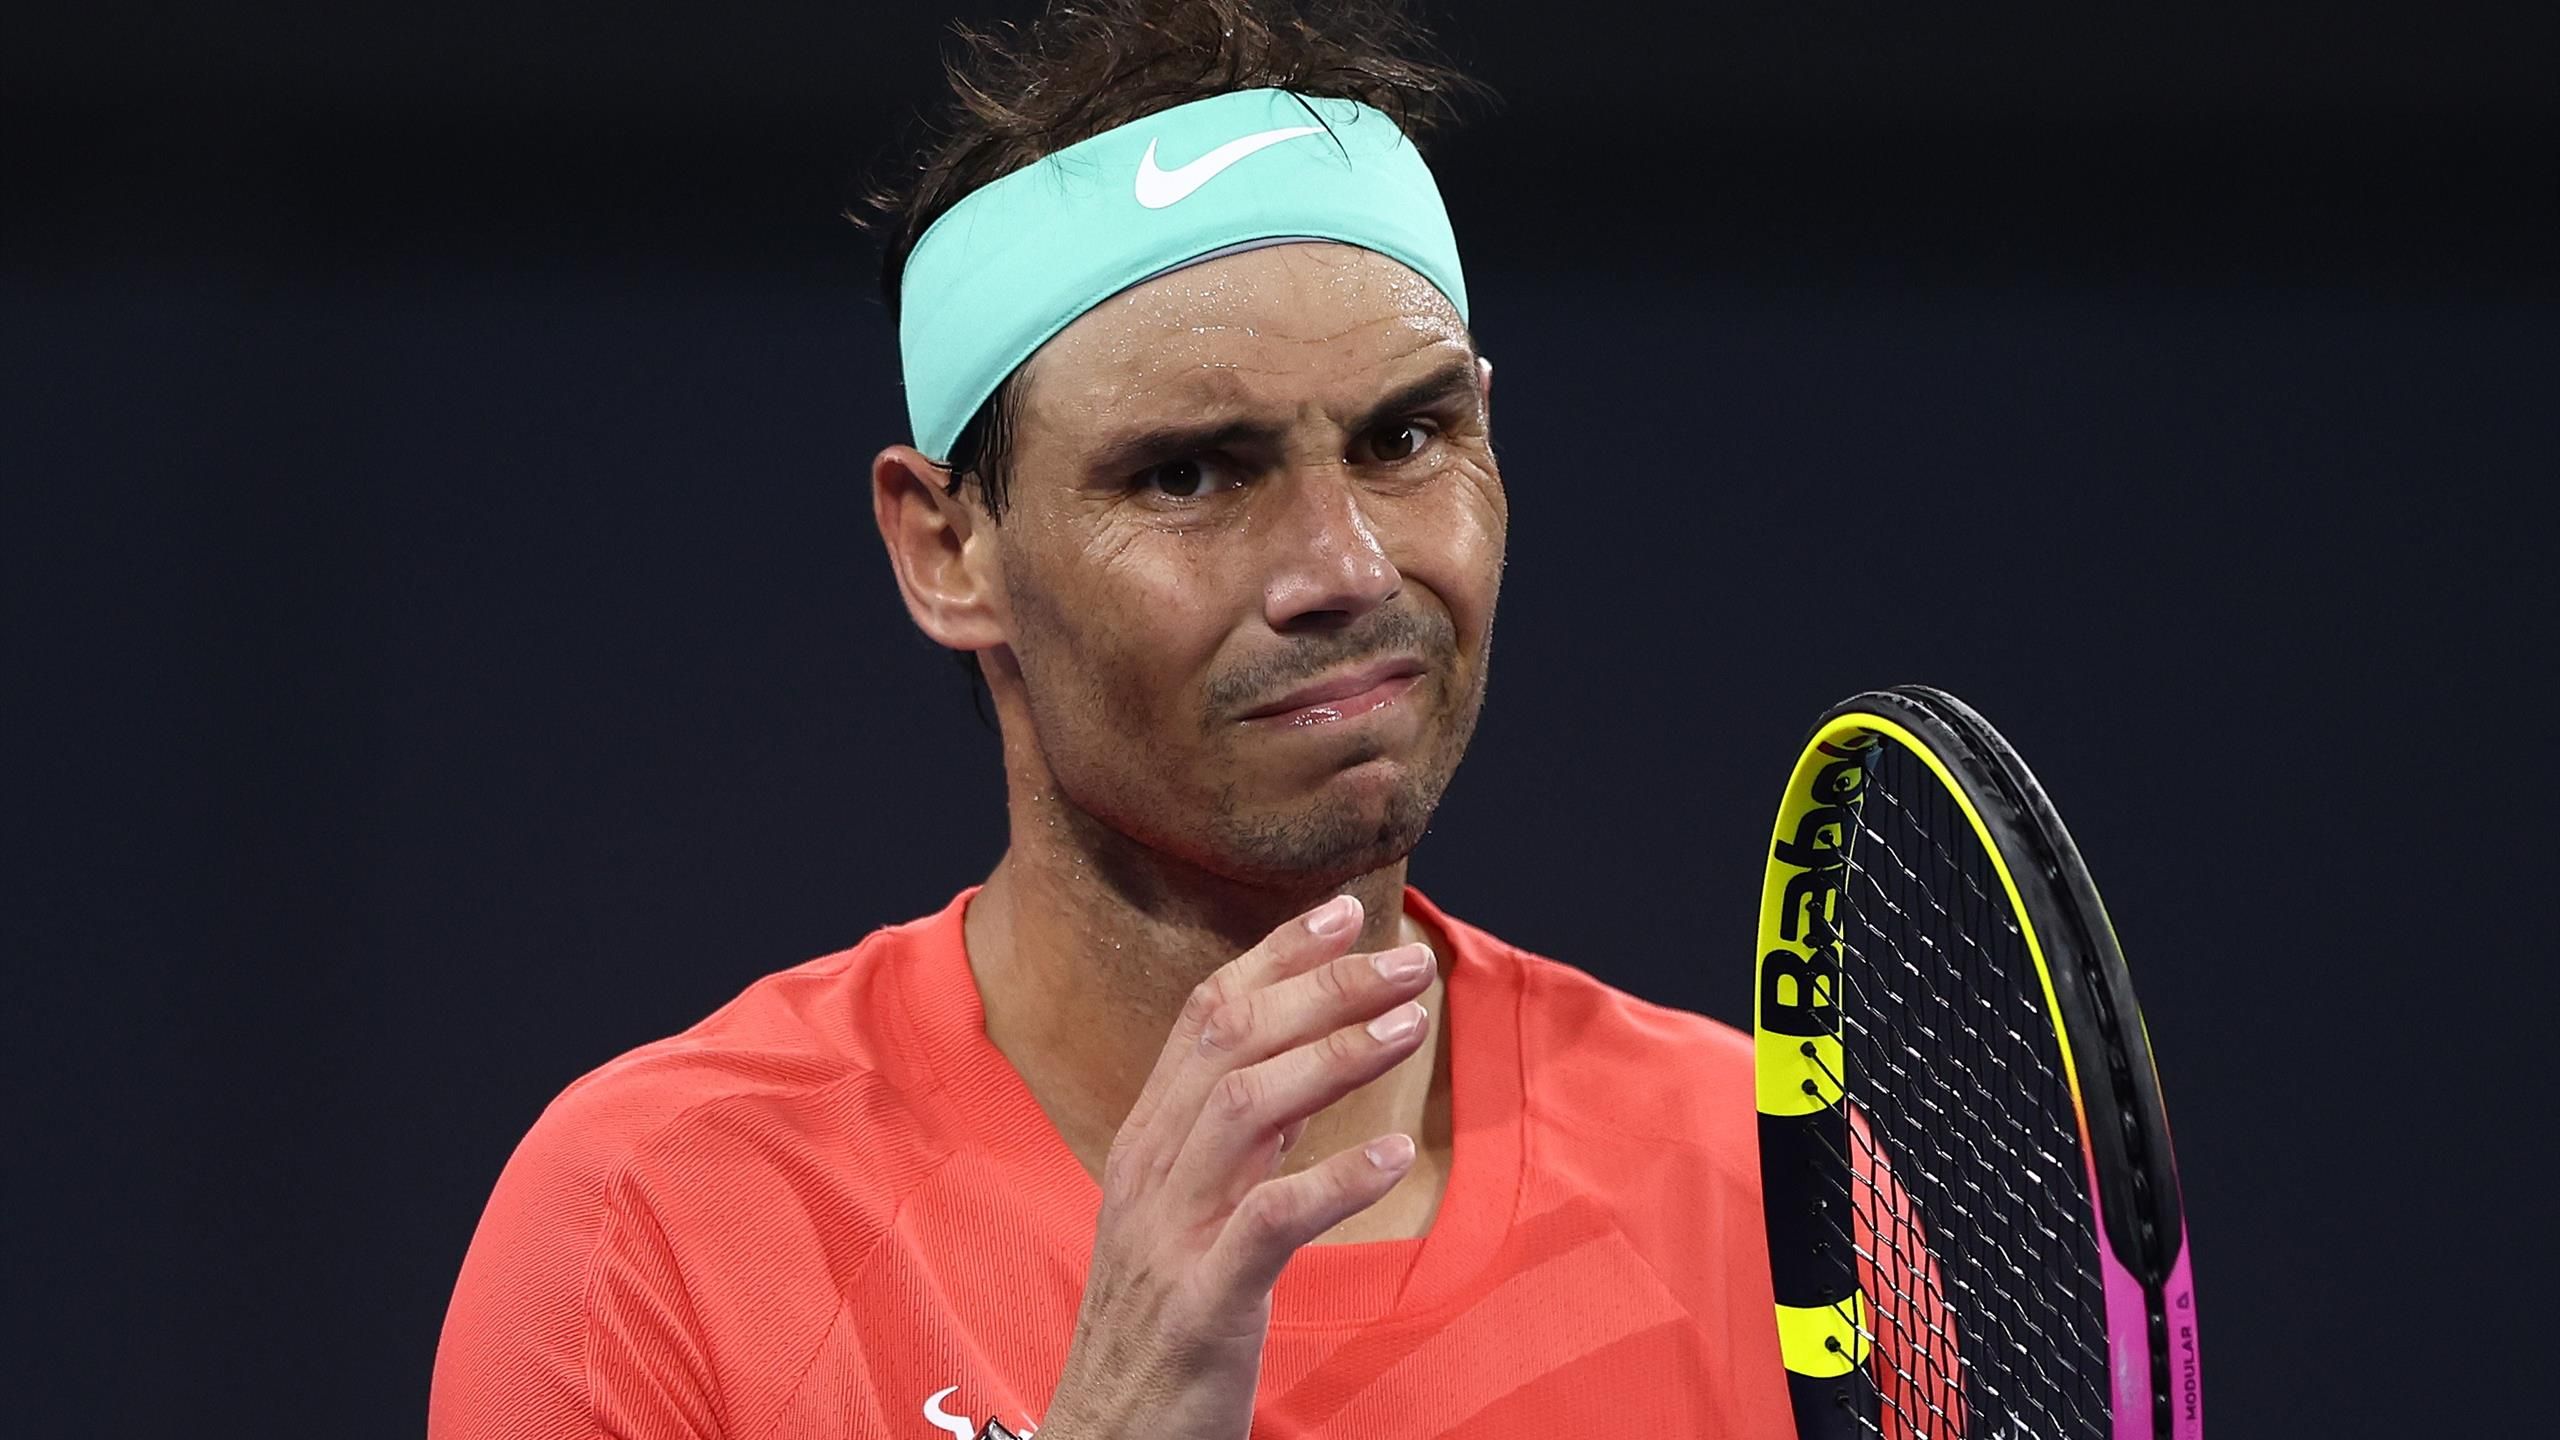 I will do my best' - Rafael Nadal 'striving' to be ready for start